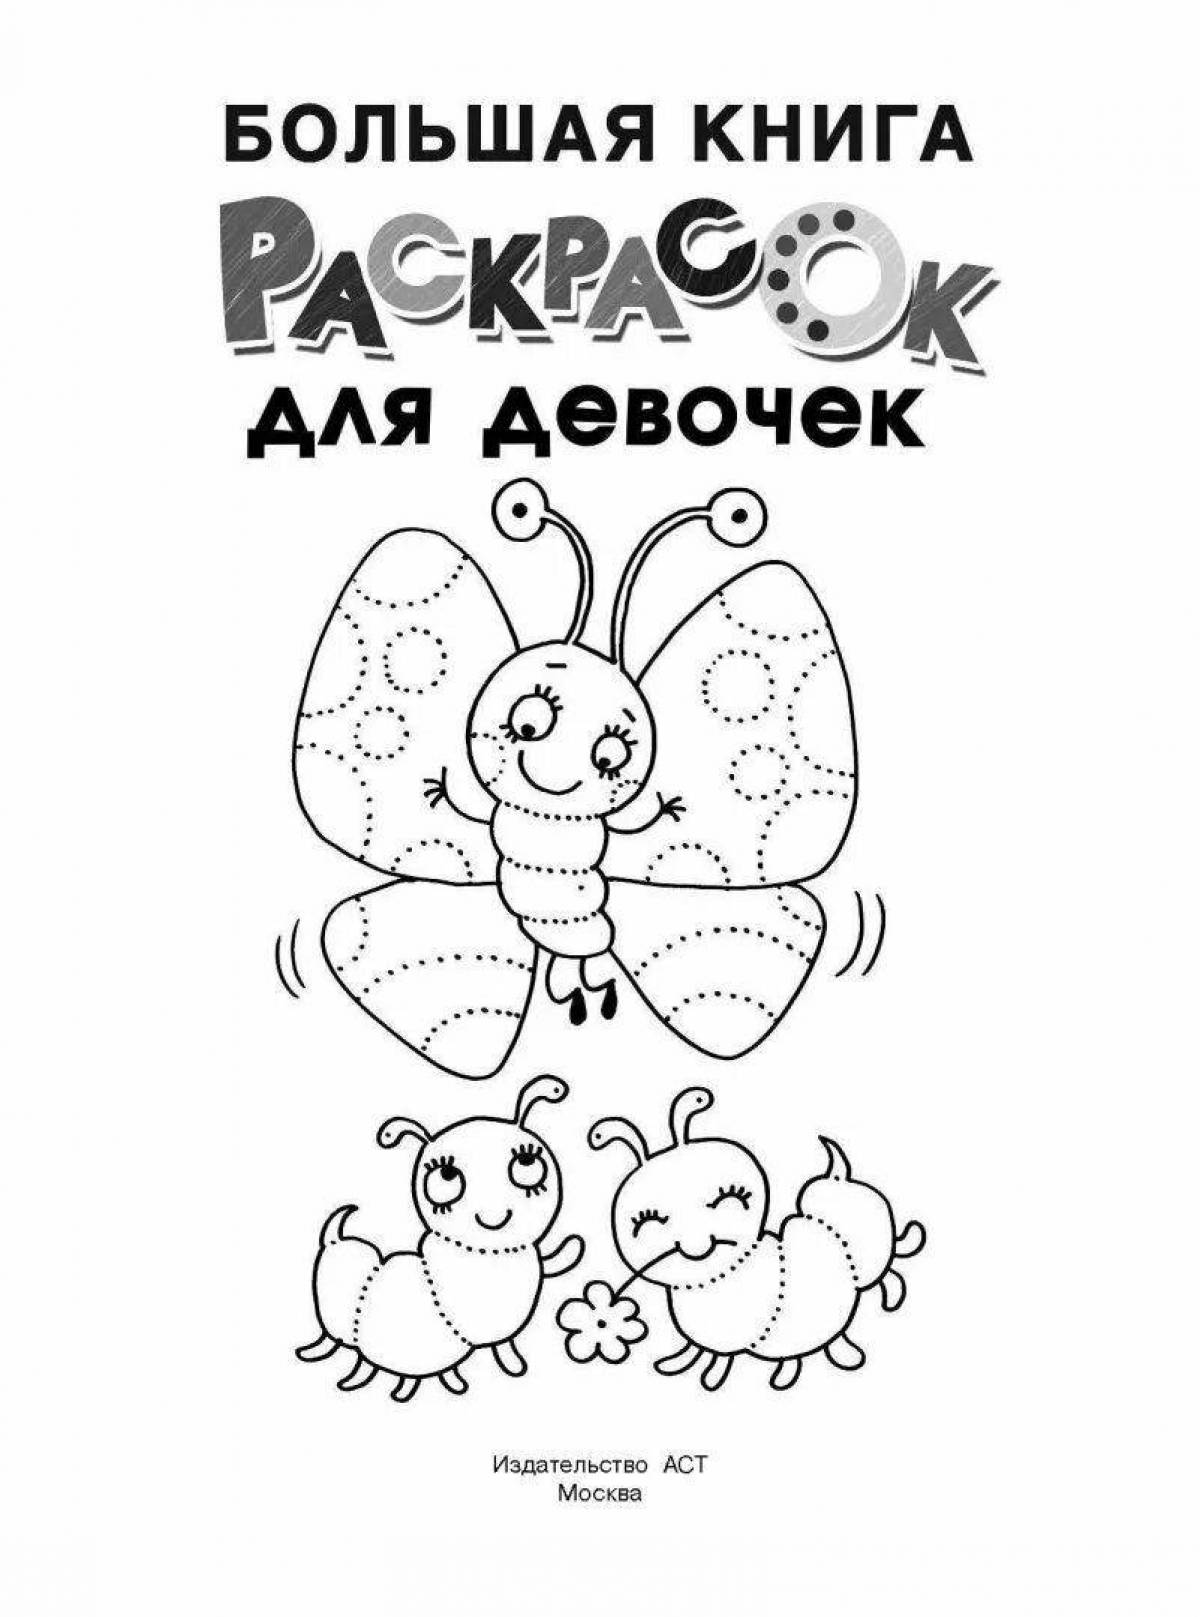 Colorful and detailed coloring book cover for children